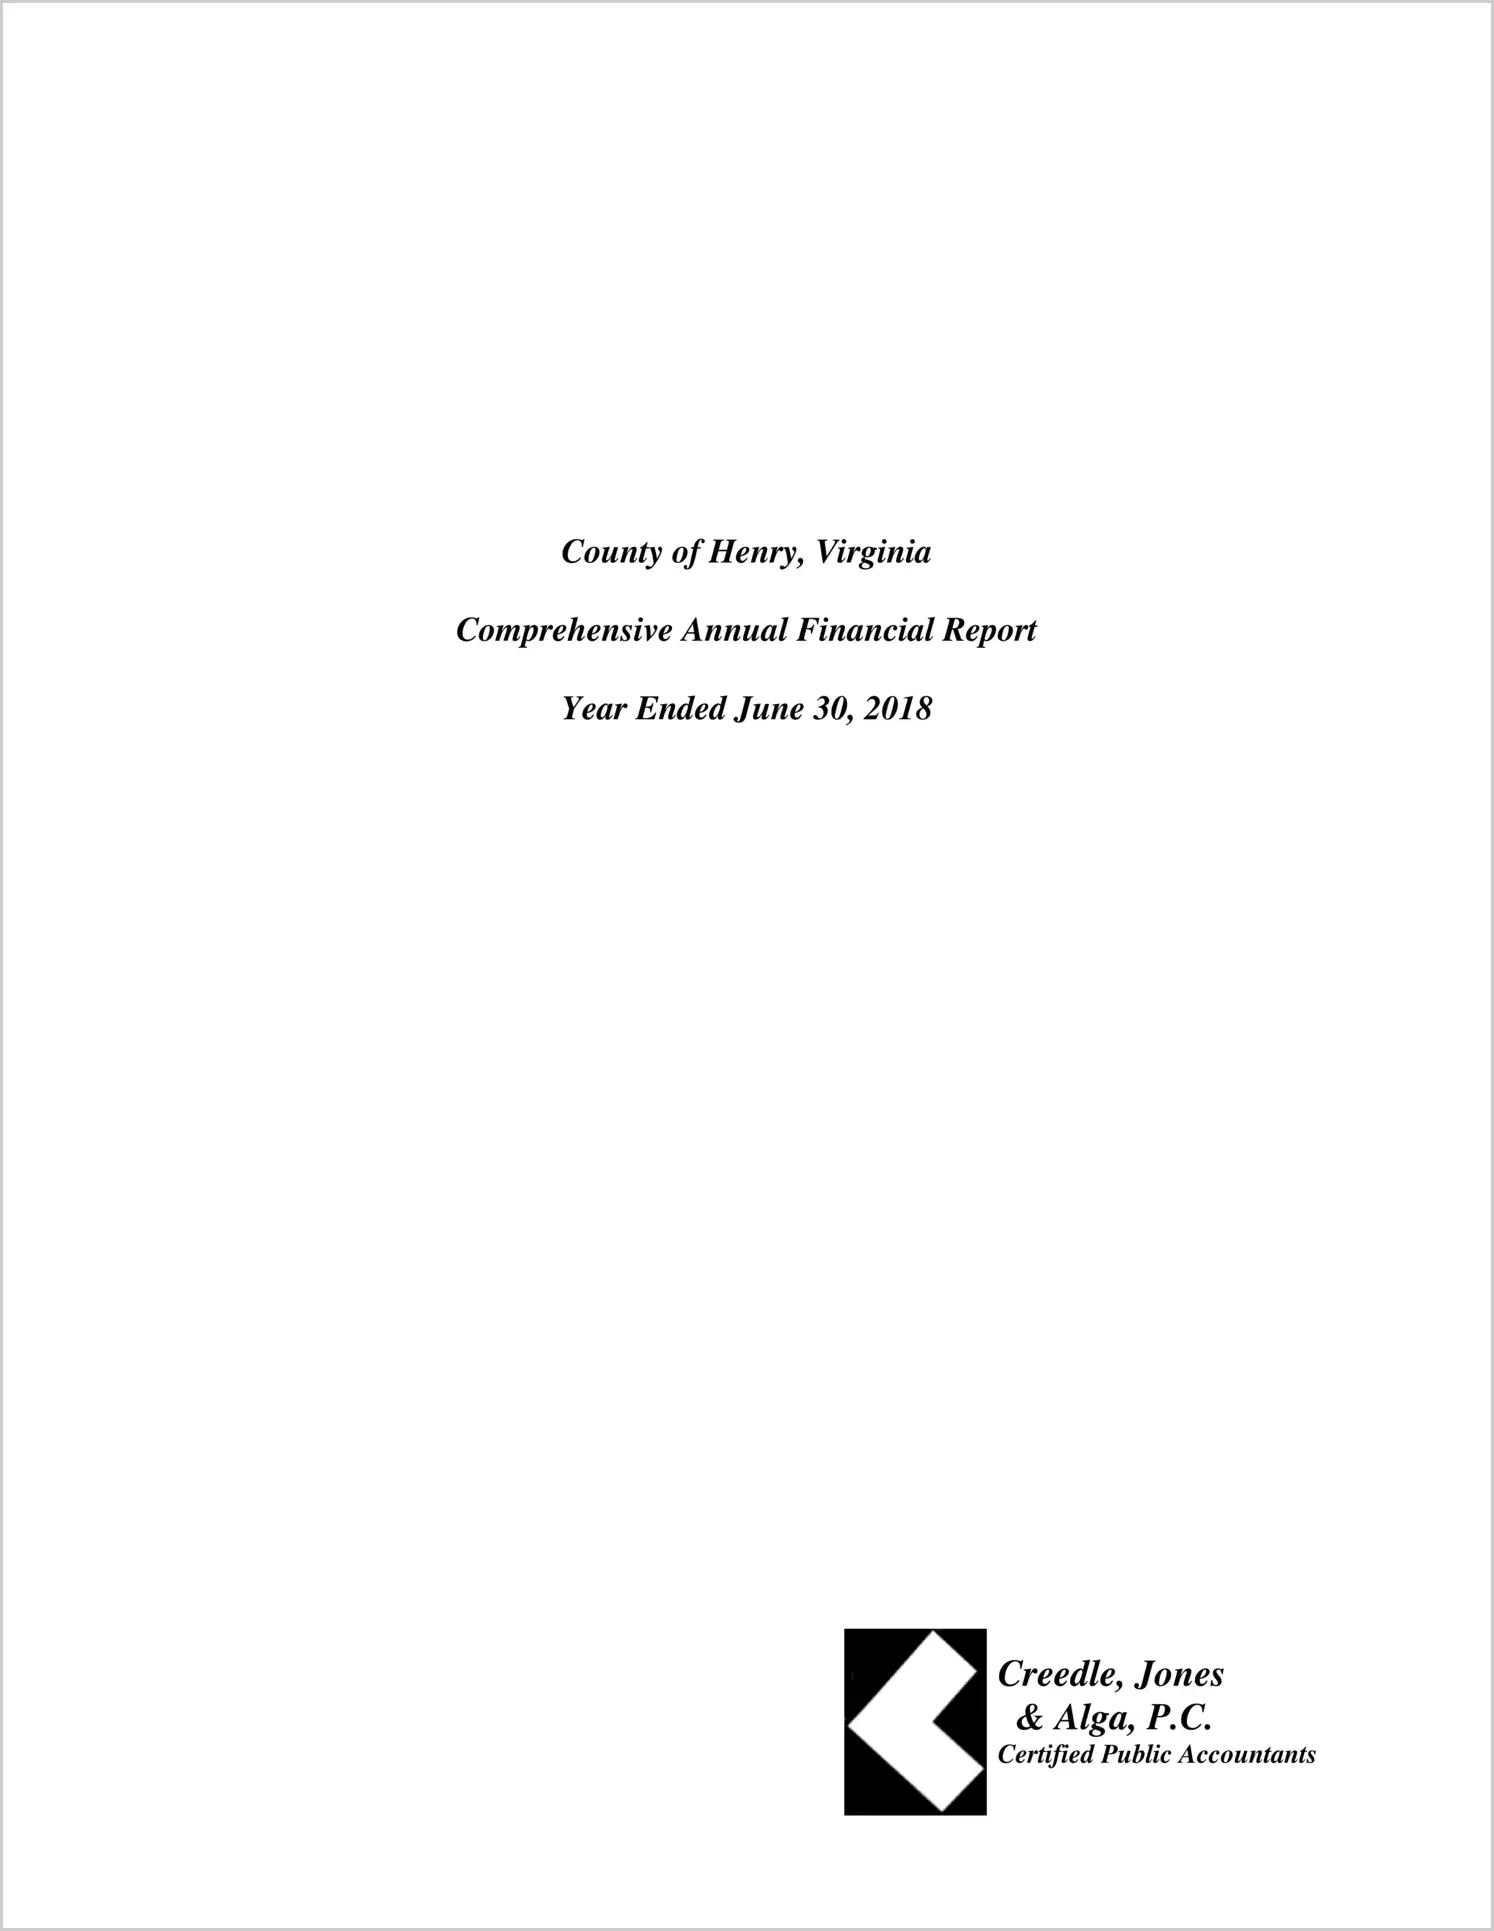 2018 Annual Financial Report for County of Henry